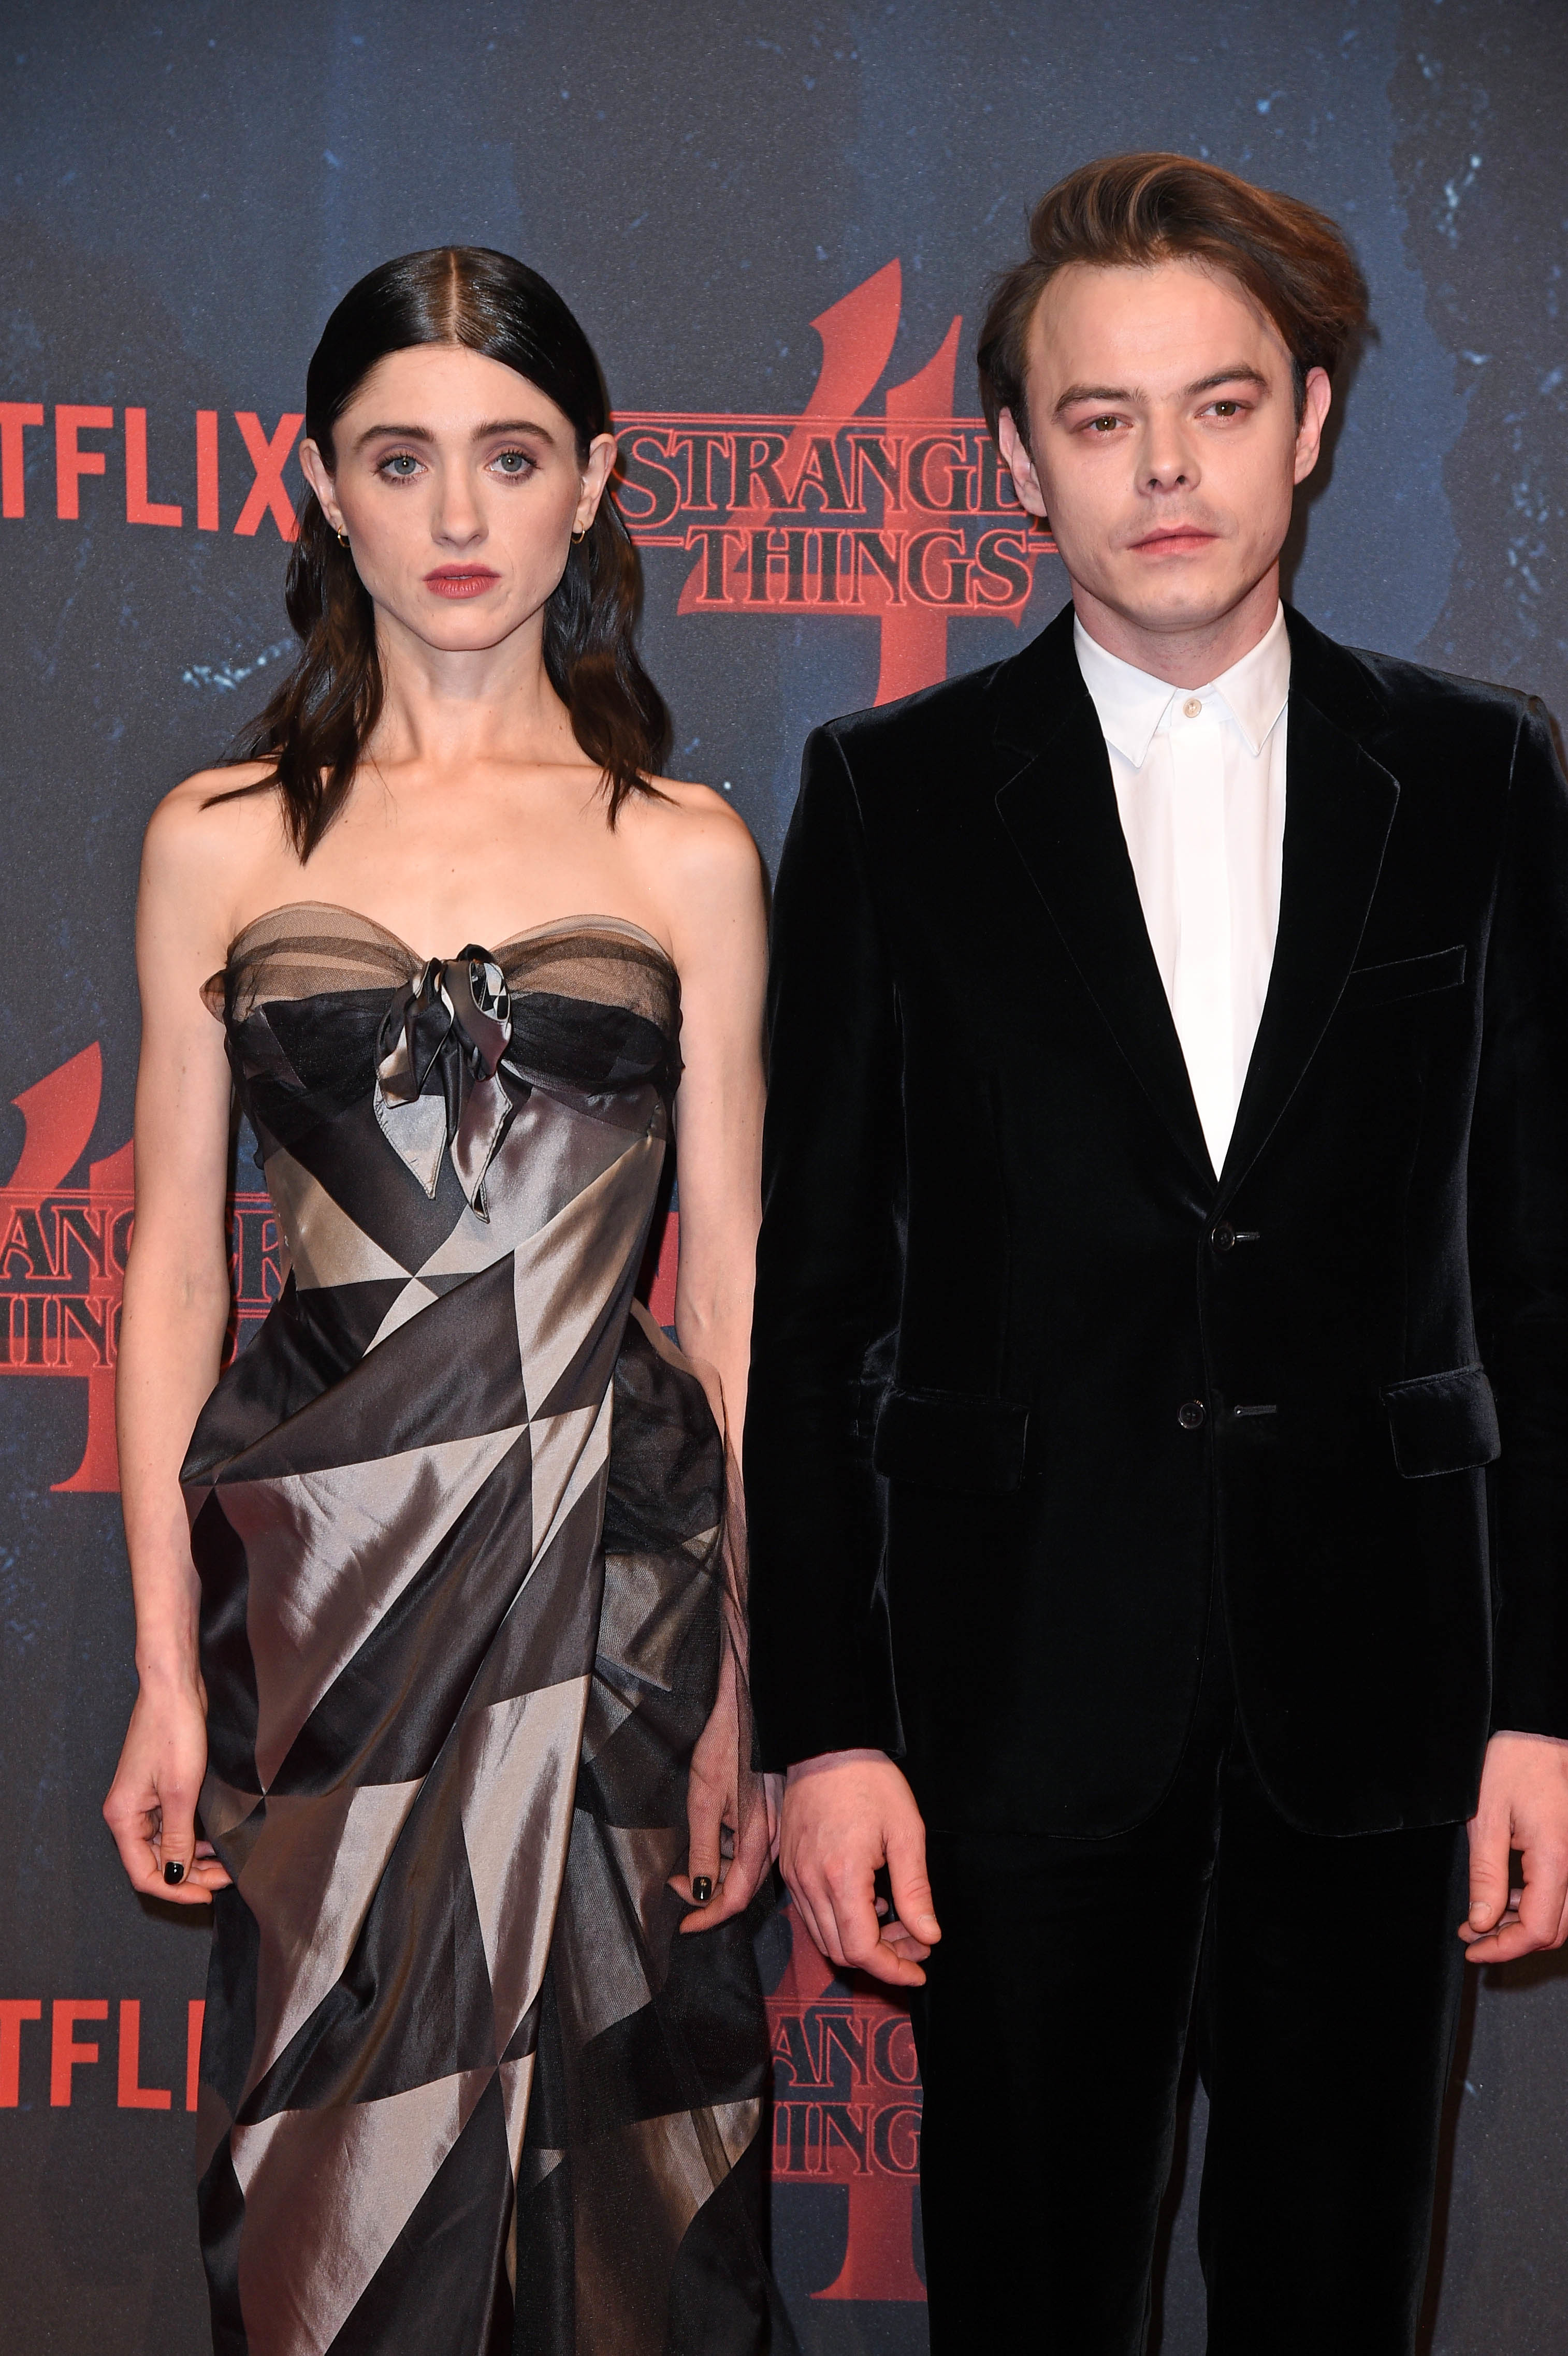 Two actors at a &#x27;Stranger Things&#x27; event, woman in a strapless dress with bow detail, man in black velvet suit